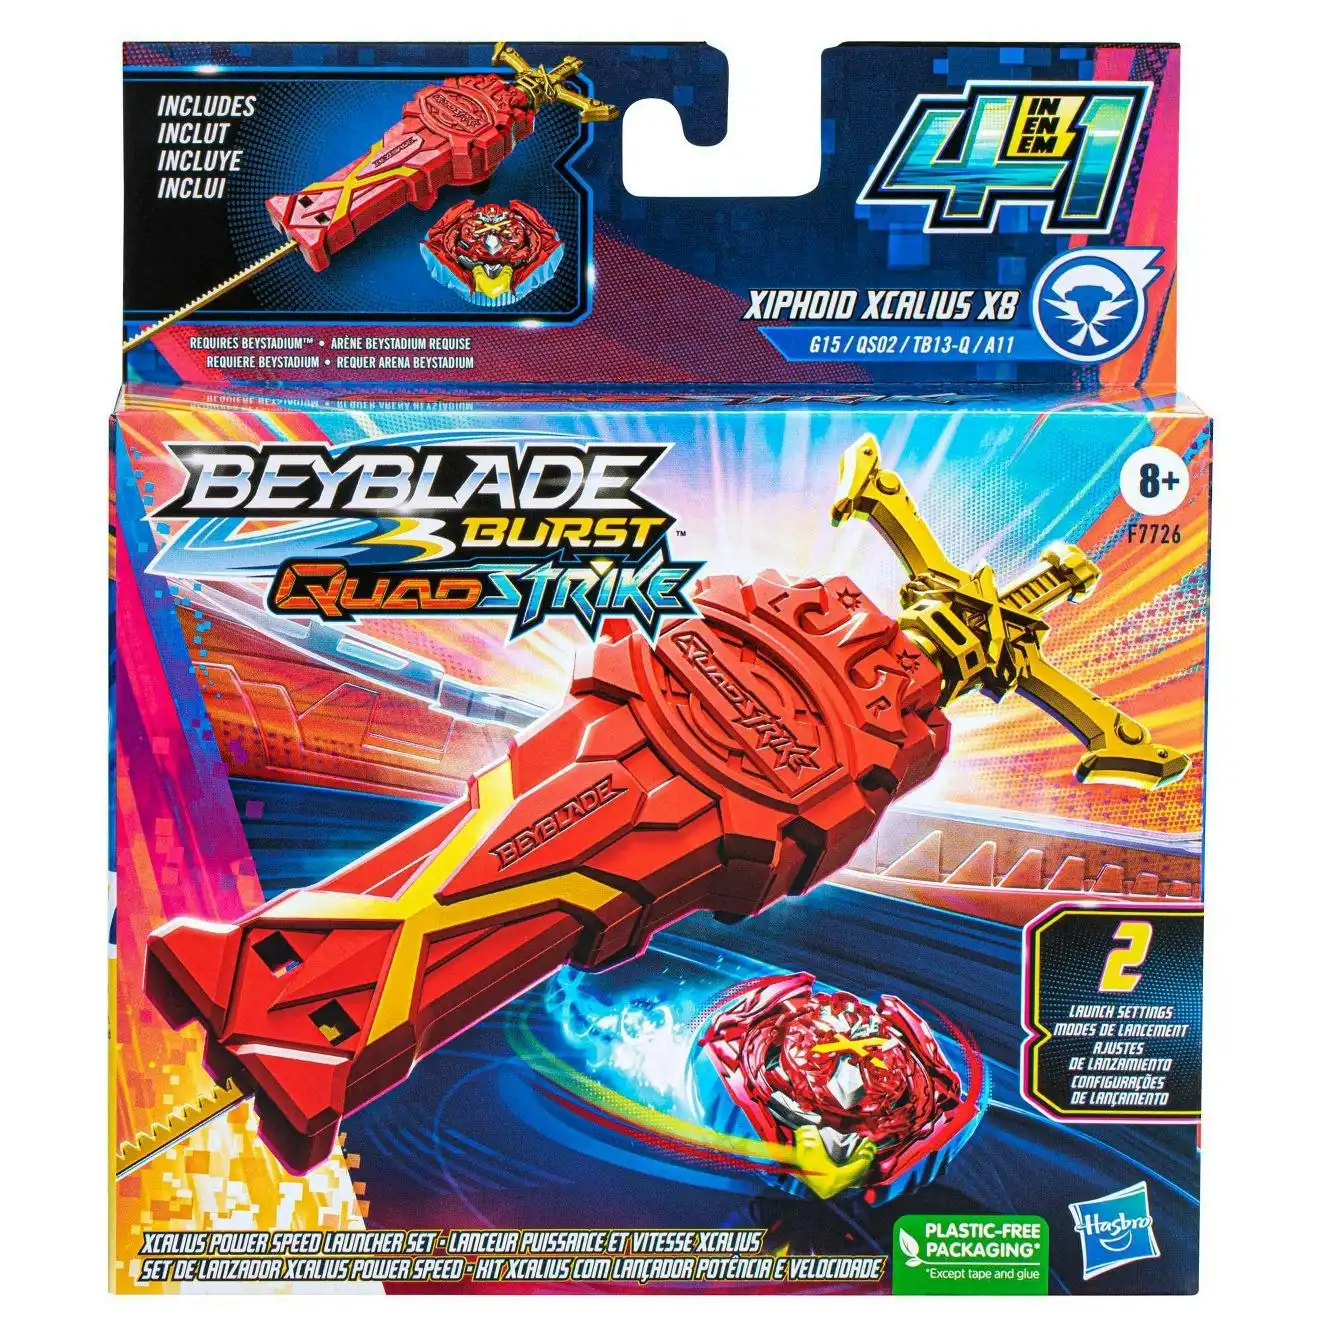 Beyblade Burst QuadStrike Xcalius Power Speed Launcher Pack With Launcher and Spinning Top Toy